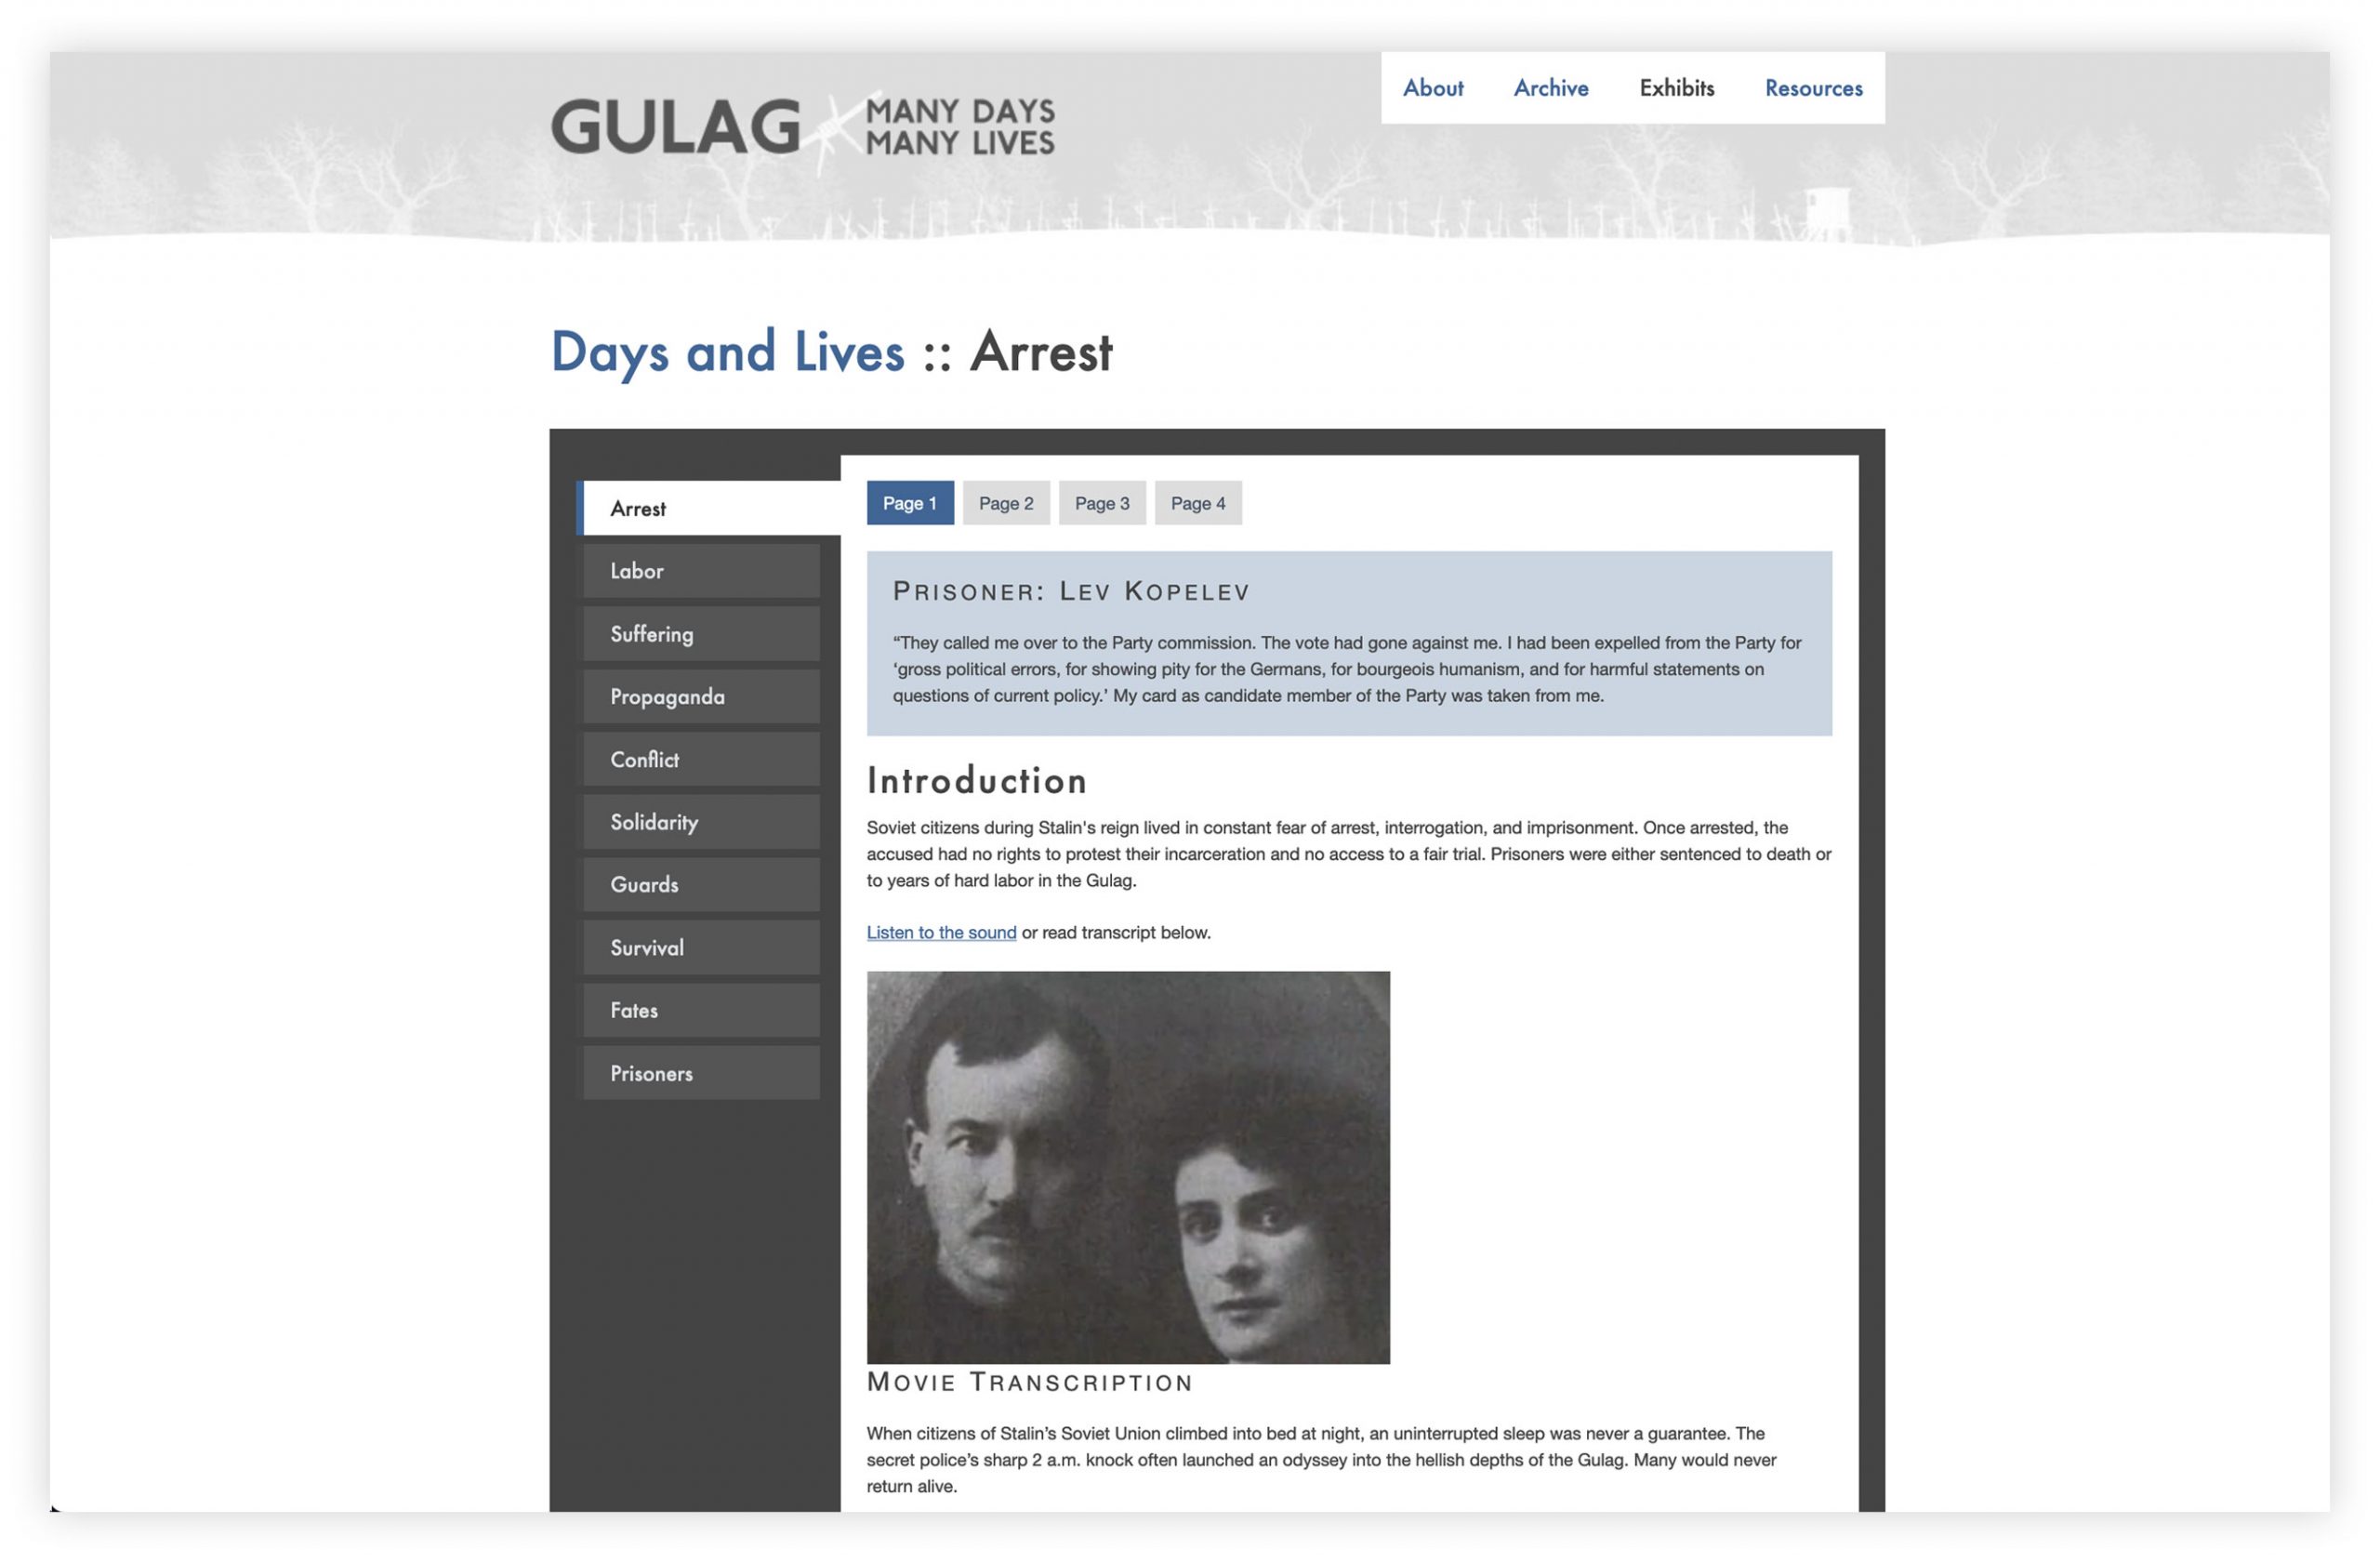 Screengrab from the Gulag: Many Days, Many Lives website Arrest section.